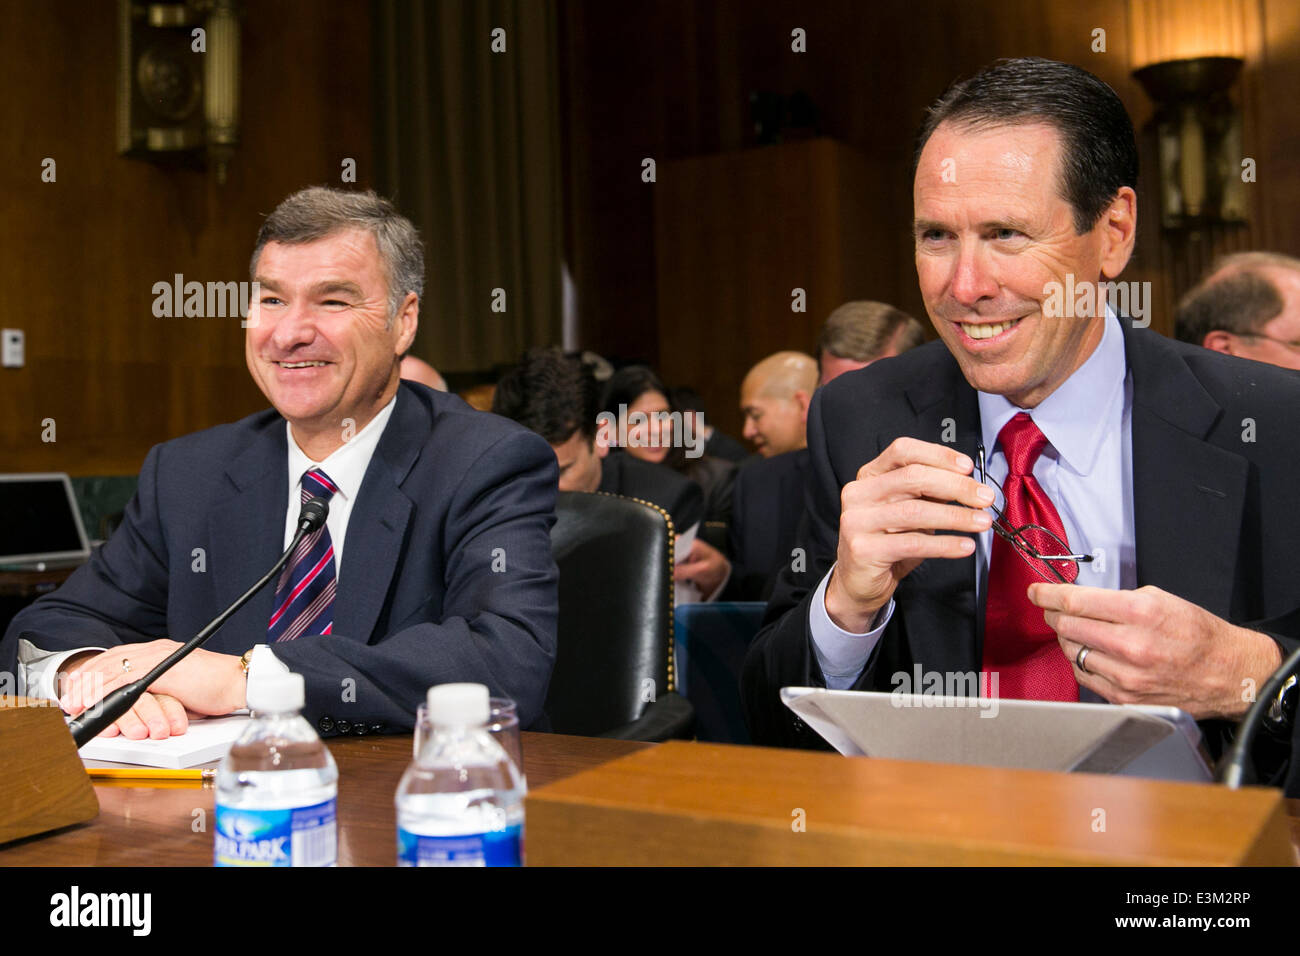 Washington DC, USA. 24th June, 2014. Michael White, chairman and CEO of DIRECTV, left, and Randall Stephenson, president and CEO of AT&T, right, testify before the Senate Antitrust, Competition Policy and Consumer Rights Subcommittee during a hearing on 'The AT&T/DIRECTV Merger: The Impact on Competition and Consumers in the Video Market and Beyond,' in Washington, D.C. on June 24, 2014. Credit:  Kristoffer Tripplaar/Alamy Live News Stock Photo